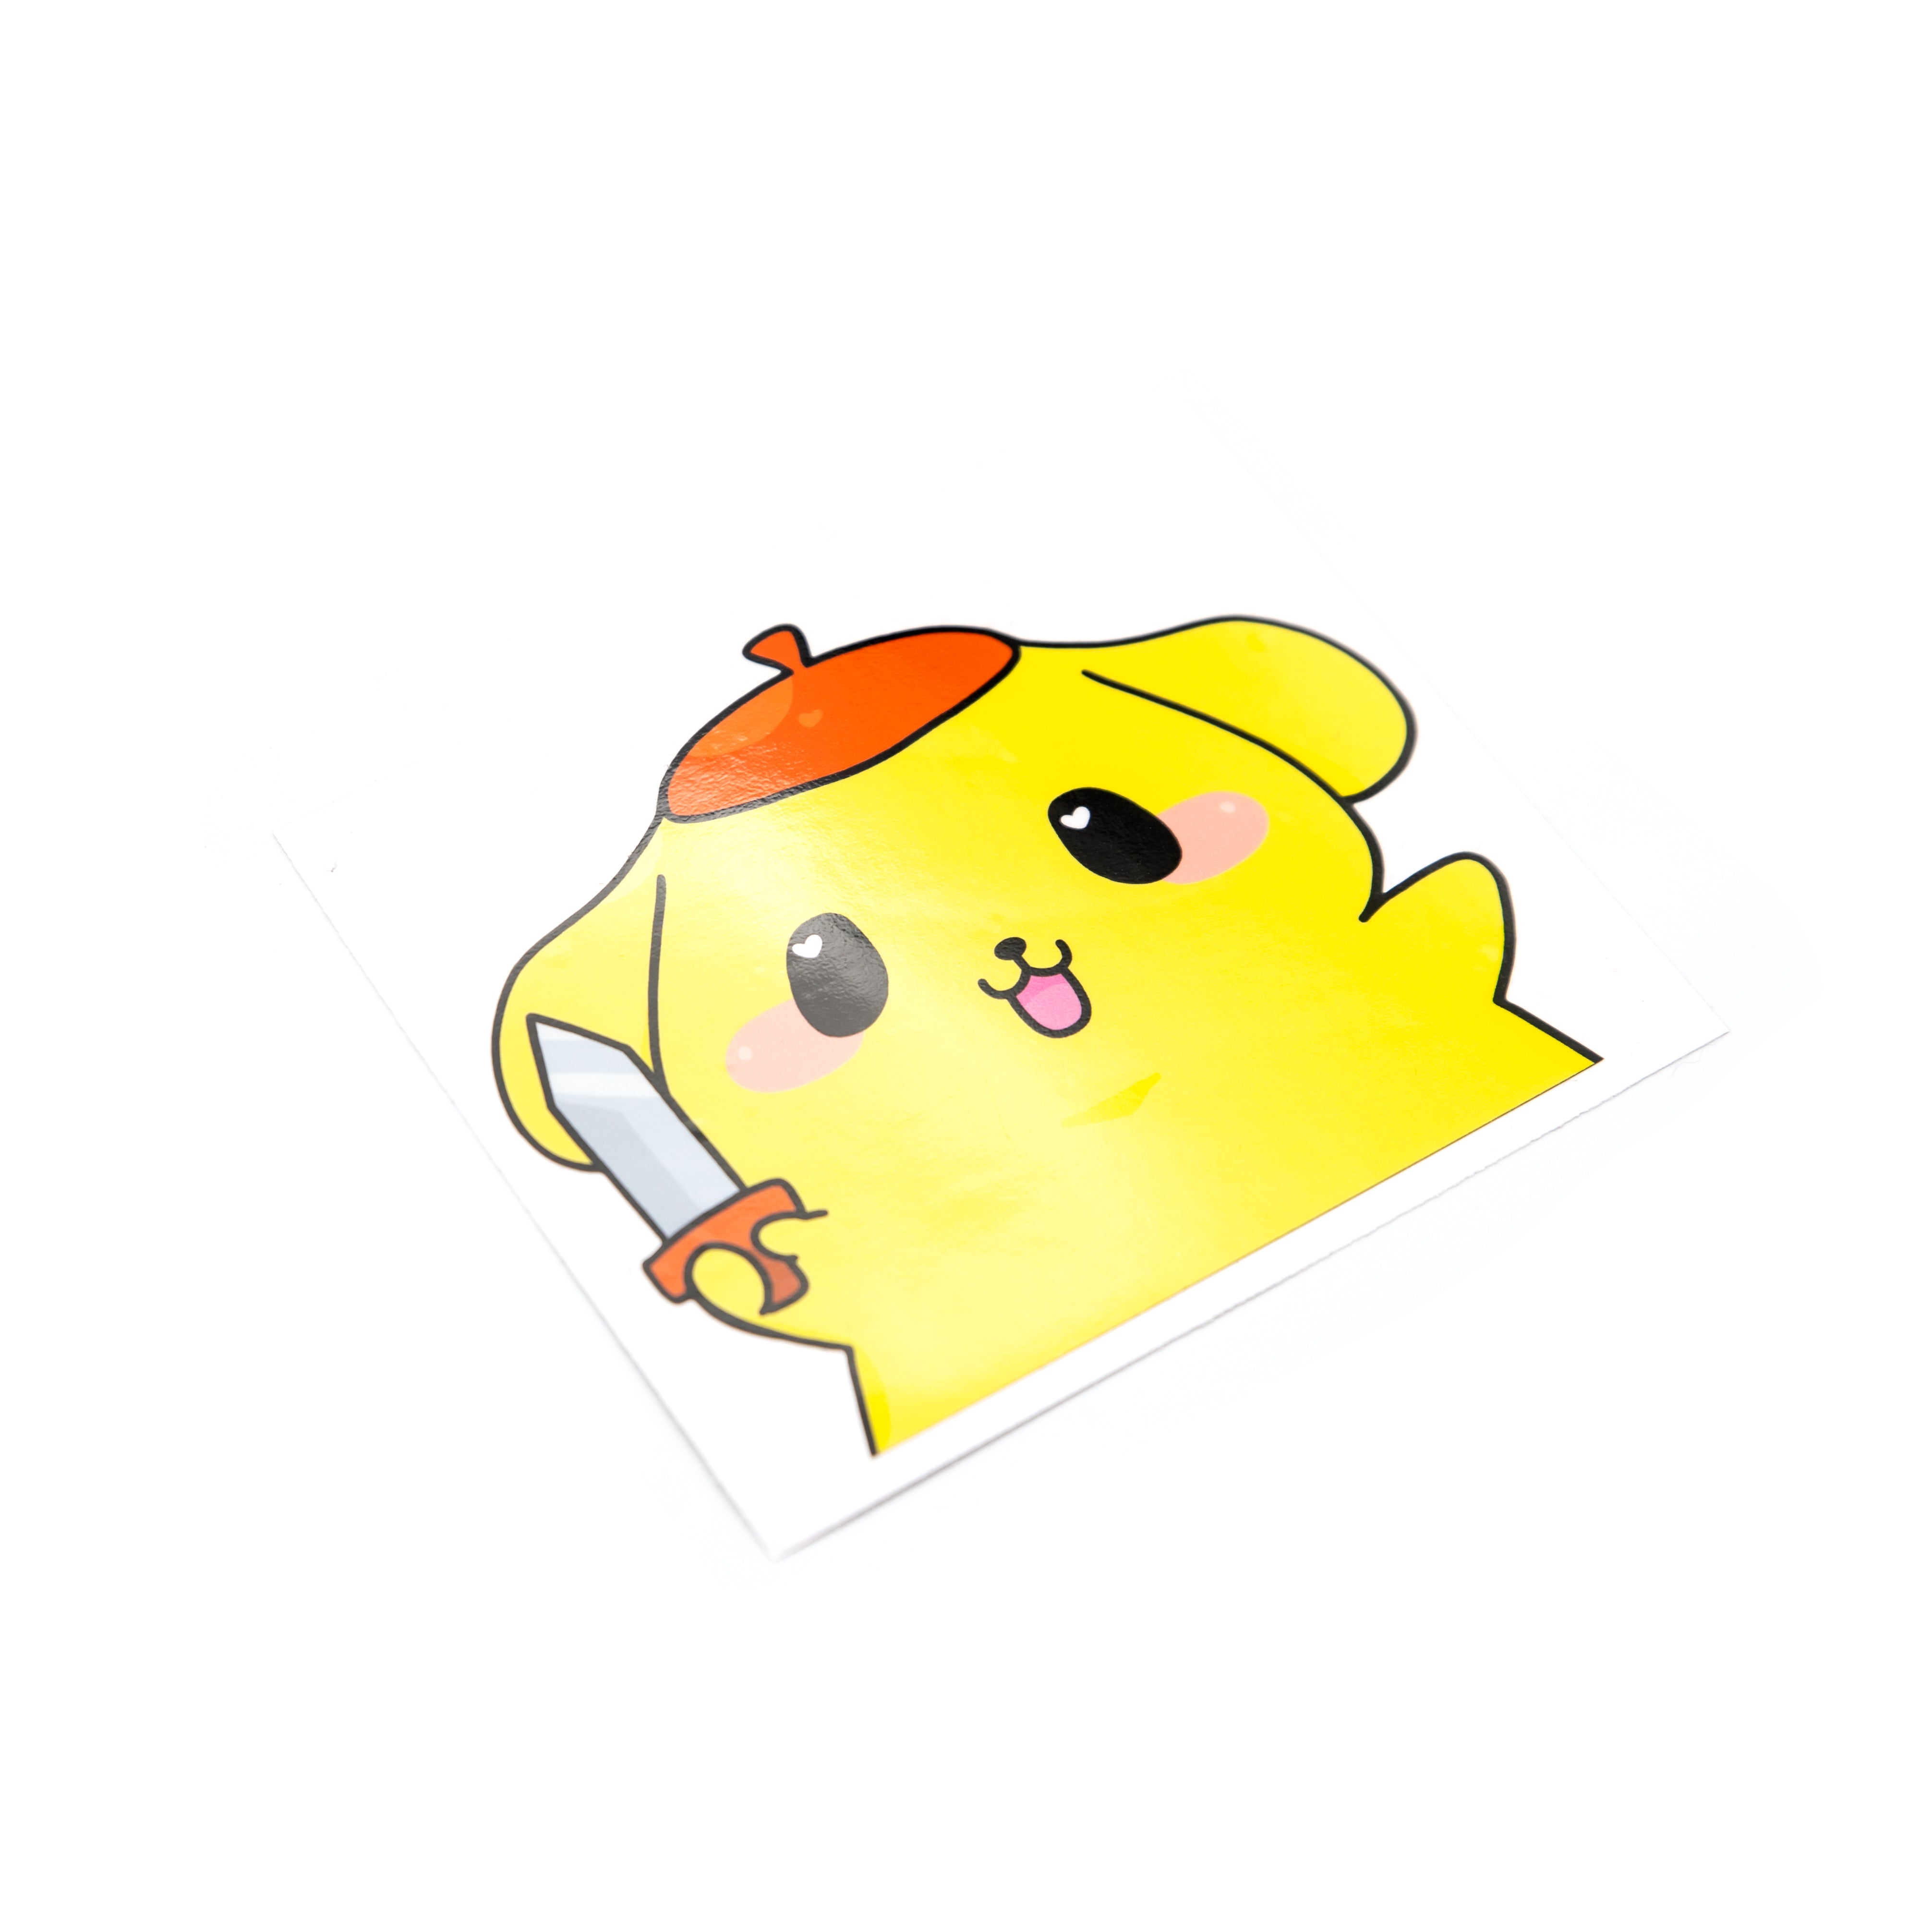 pompompurin with a knife or sword whichever you want.